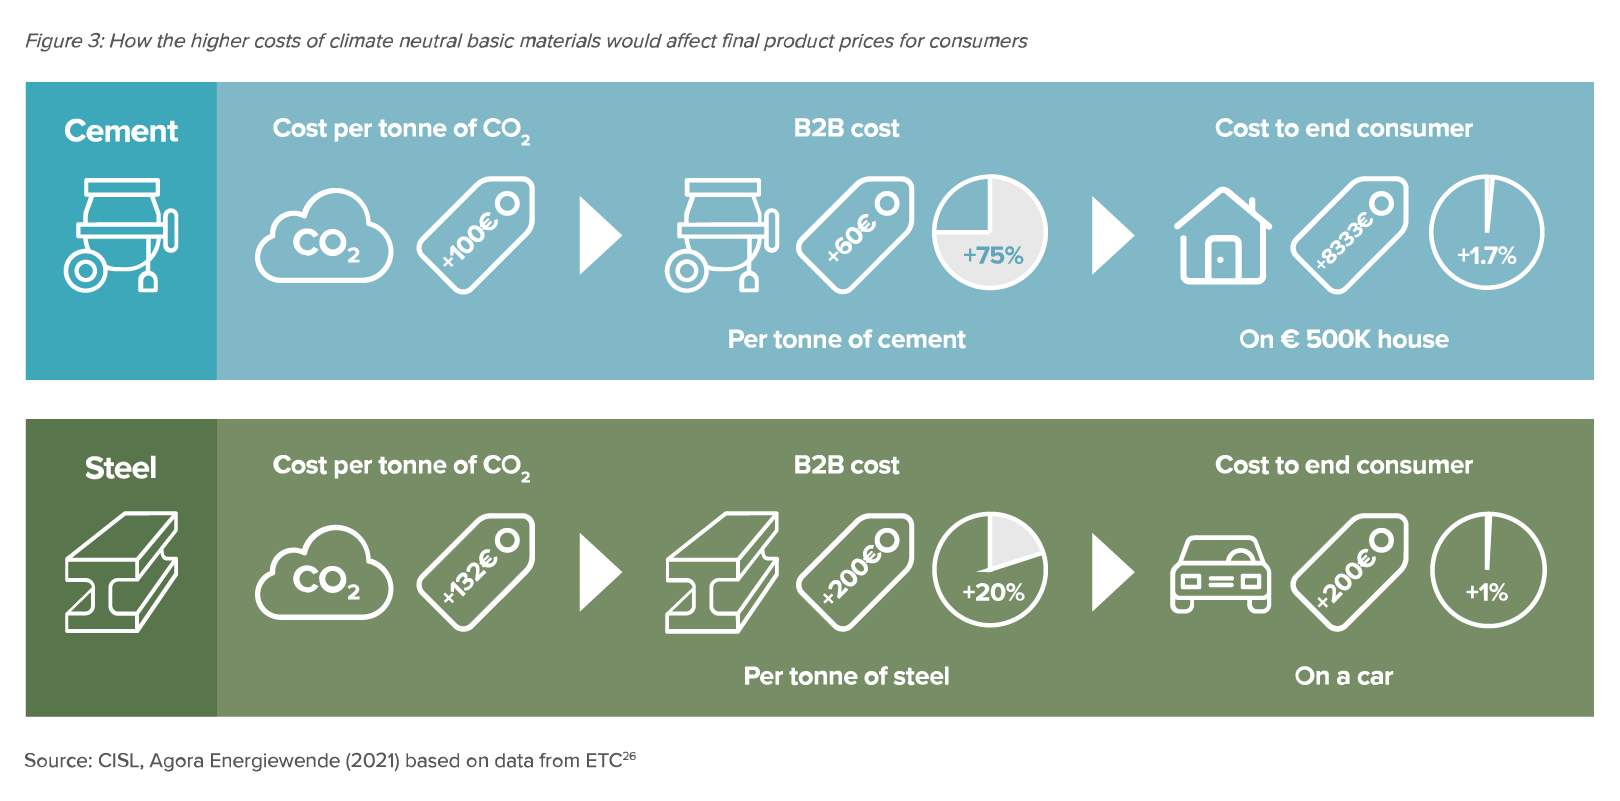 Preview for How the higher costs of climate neutral basic materials would affect final product prices for consumers